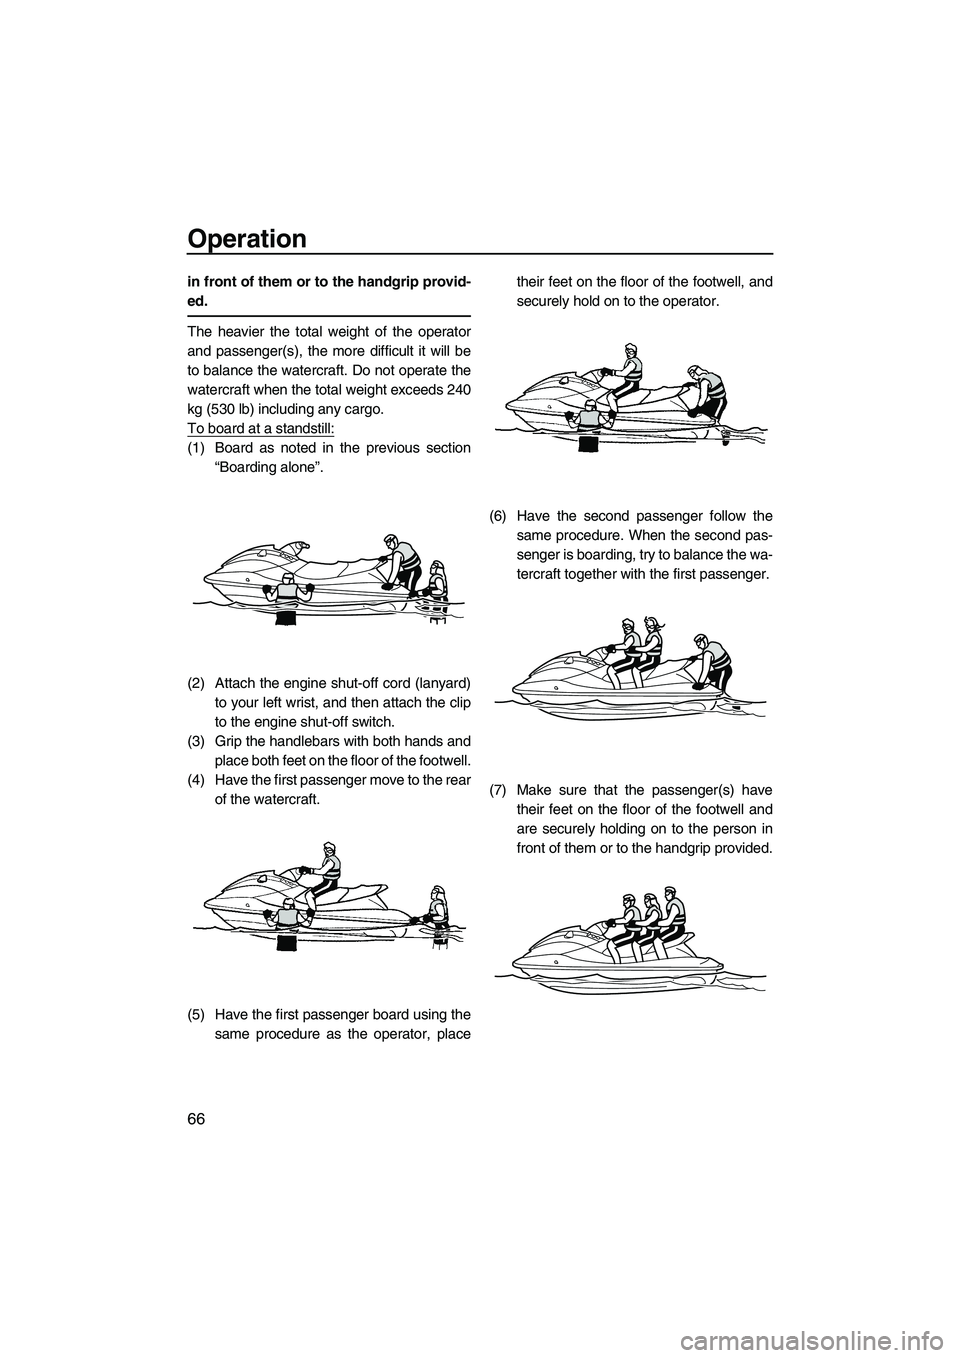 YAMAHA VX SPORT 2013  Owners Manual Operation
66
in front of them or to the handgrip provid-
ed.
The heavier the total weight of the operator
and passenger(s), the more difficult it will be
to balance the watercraft. Do not operate the
